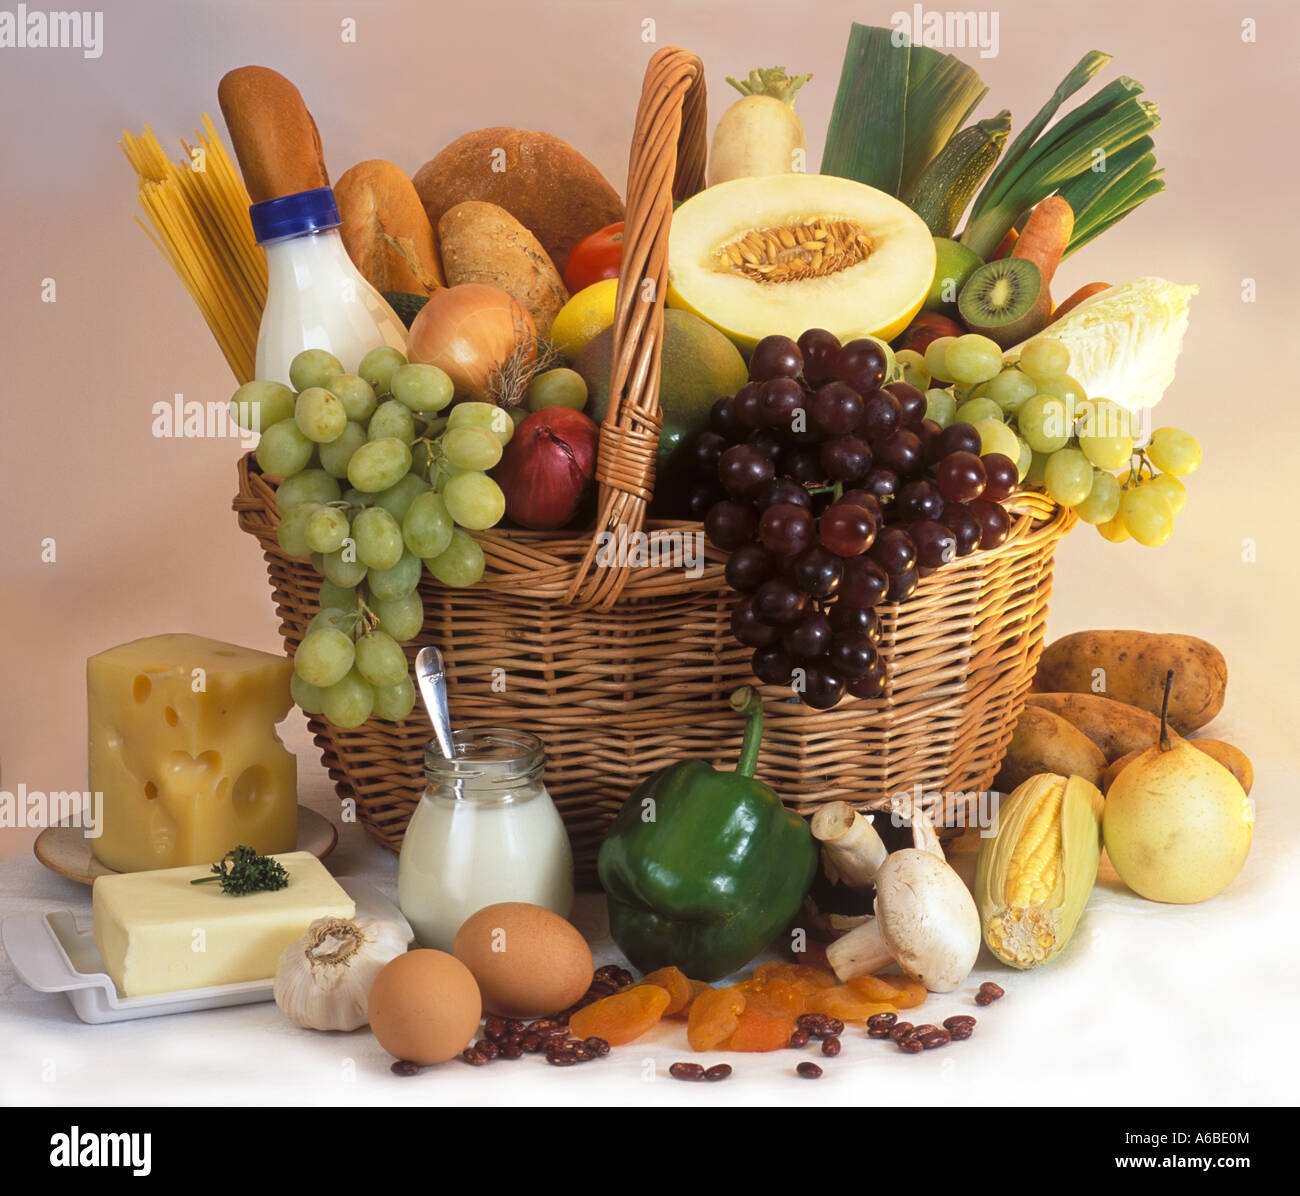 Basket filled with Nutrition Stock Photo